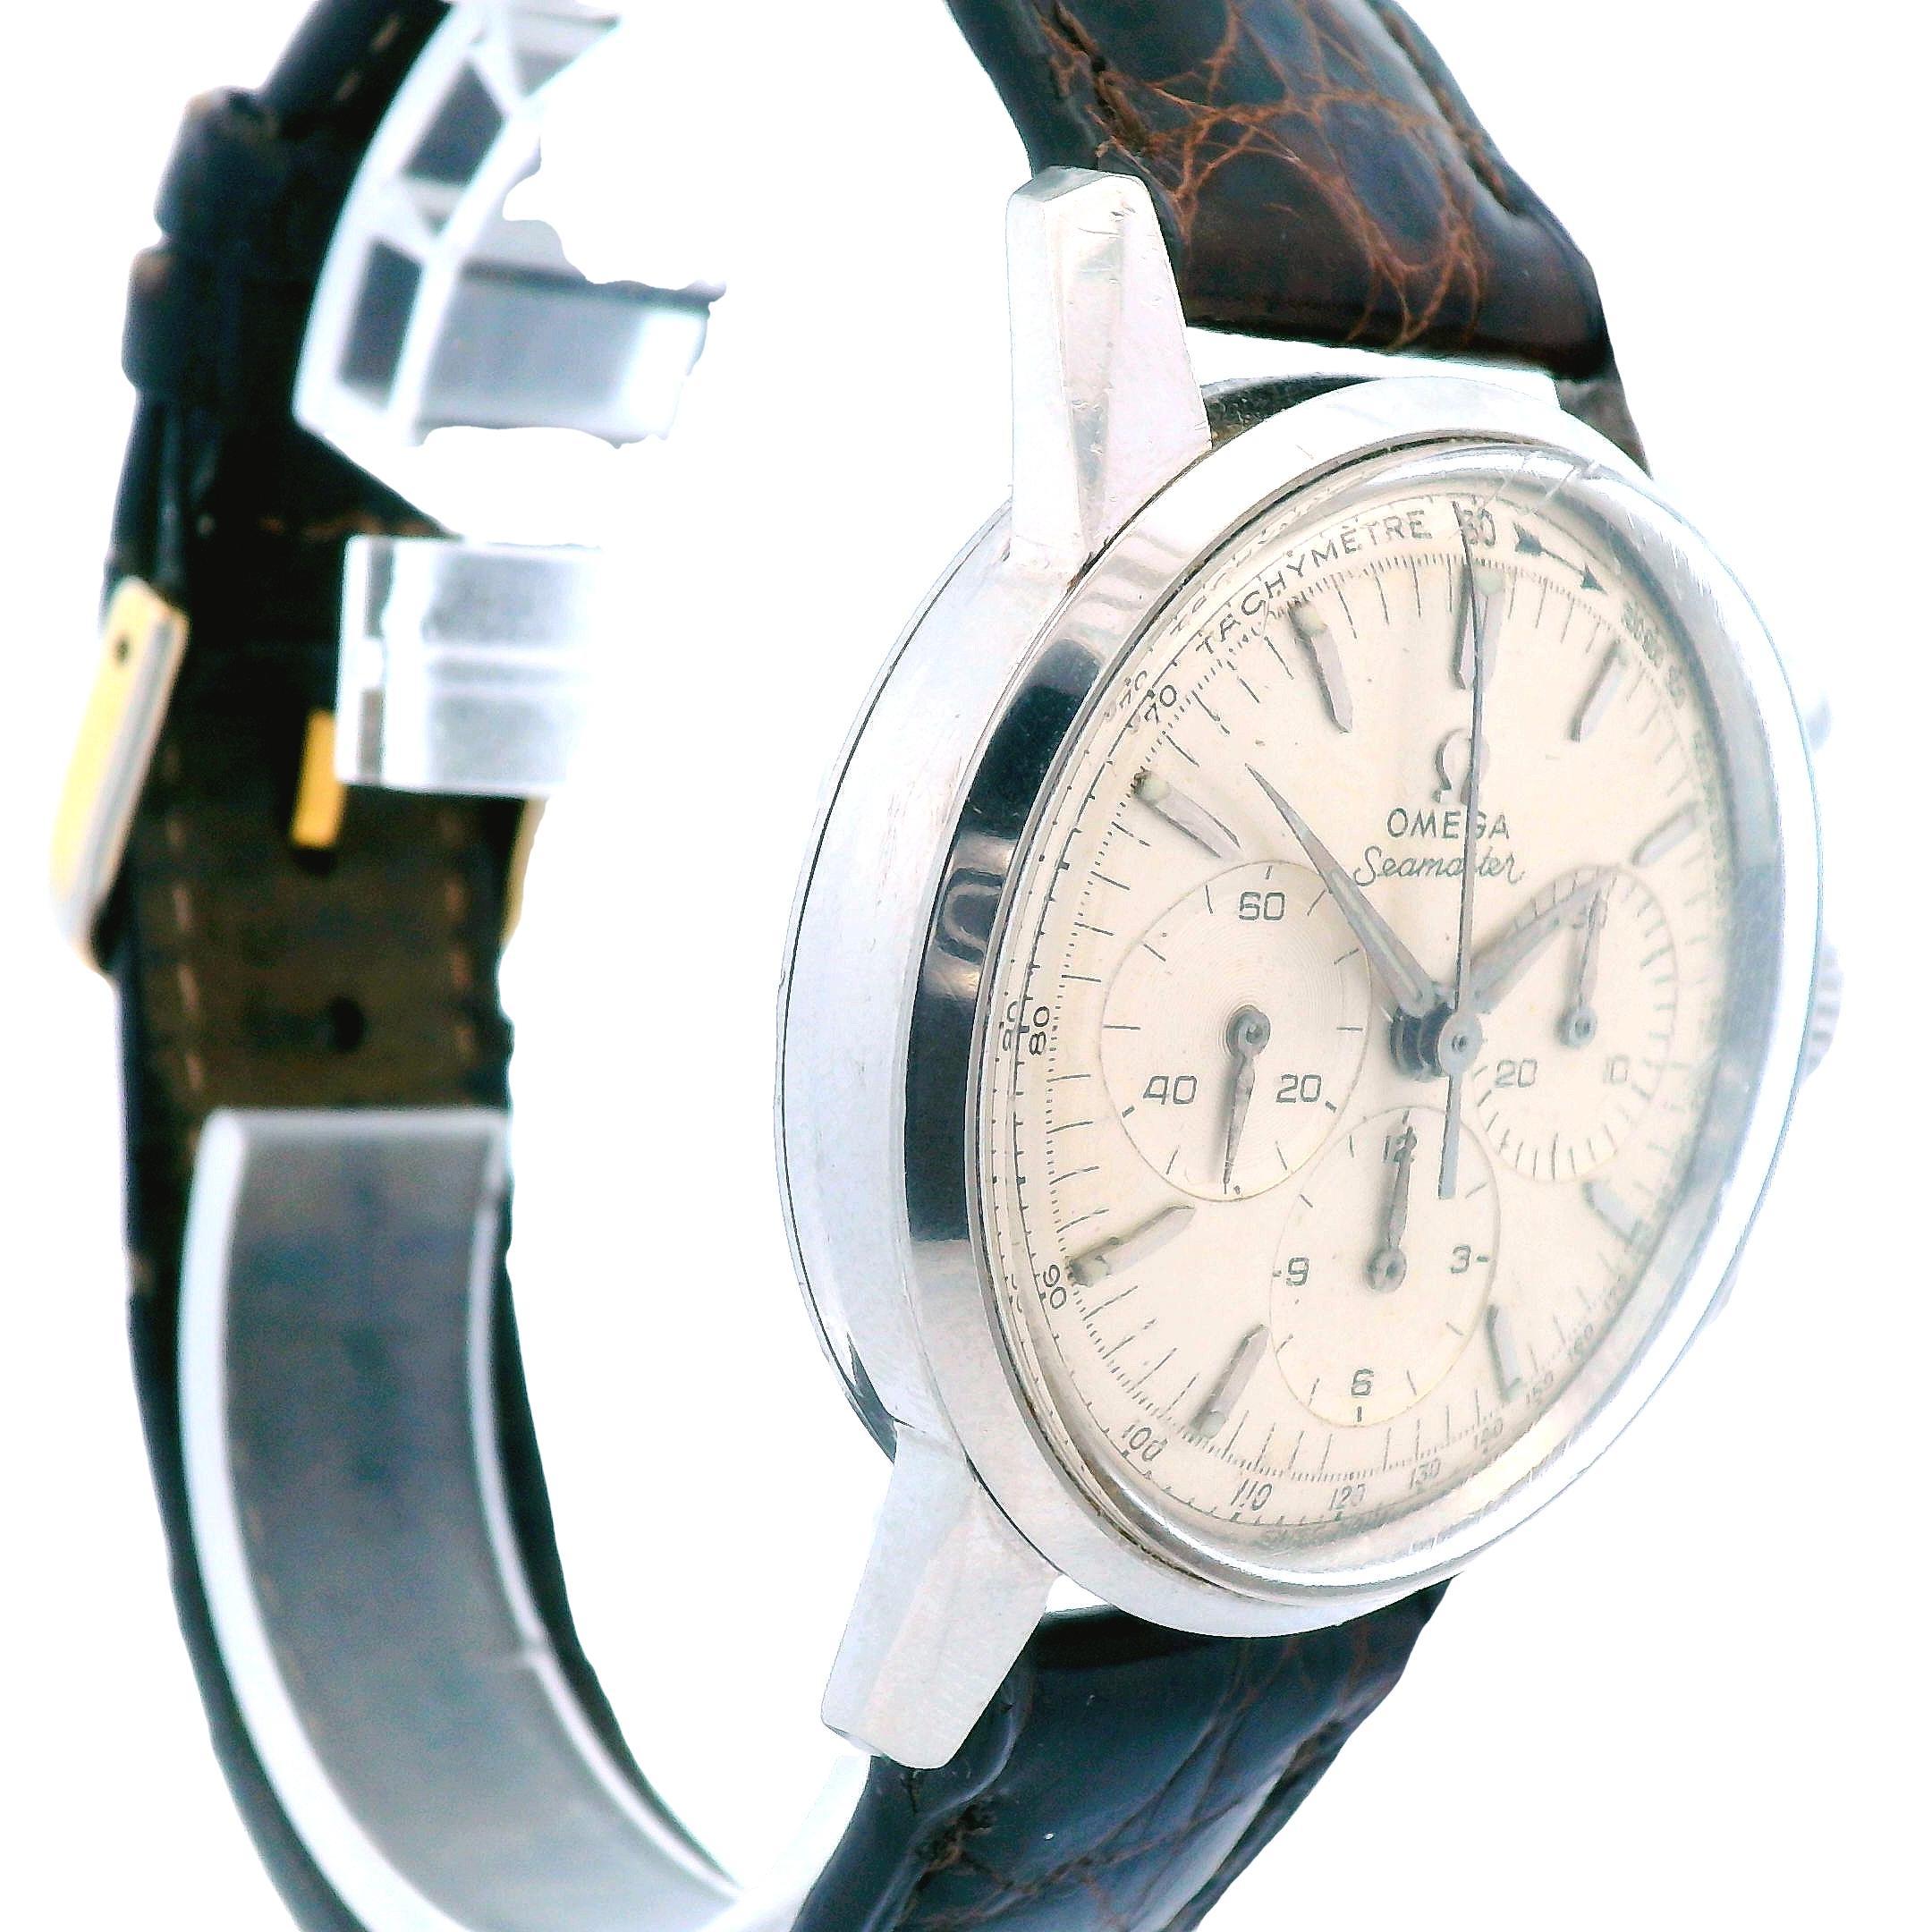 1960s Omega Seamaster Chronograph Watch in Stainless Steel - Running For Sale 5